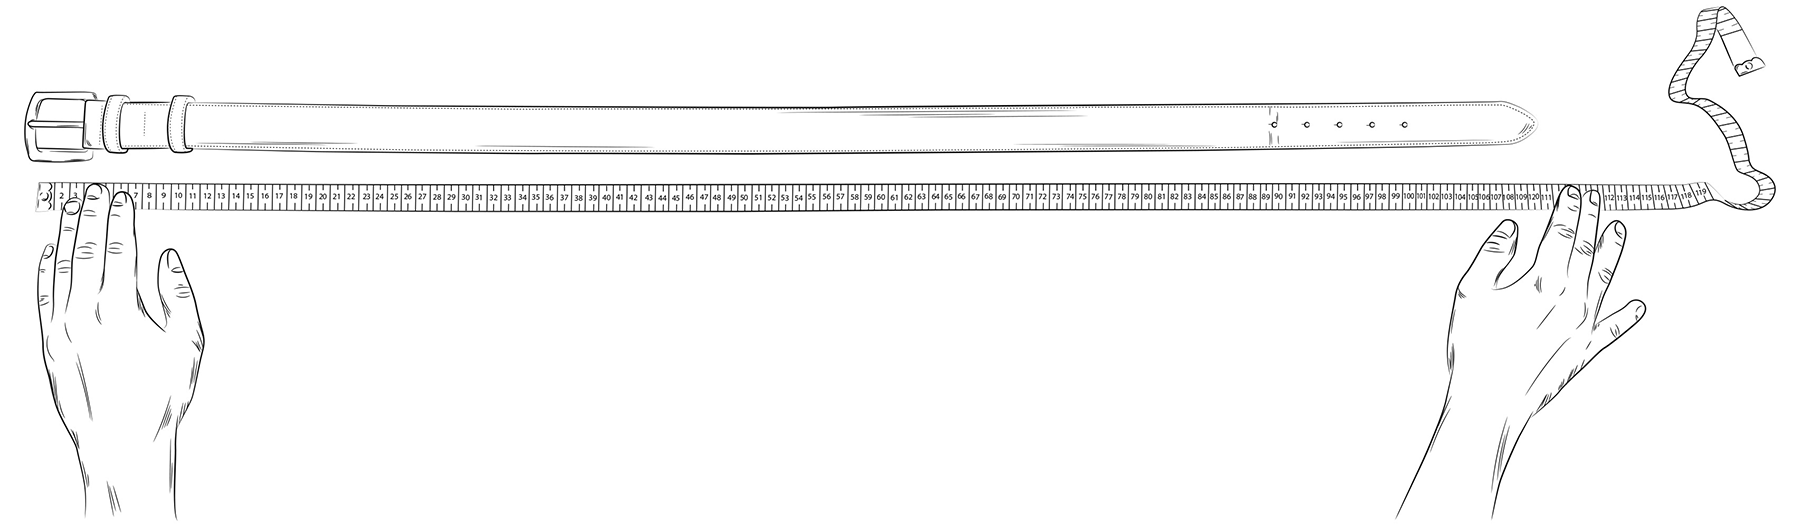 Illustration showing how can measure you belt size using an old belt.